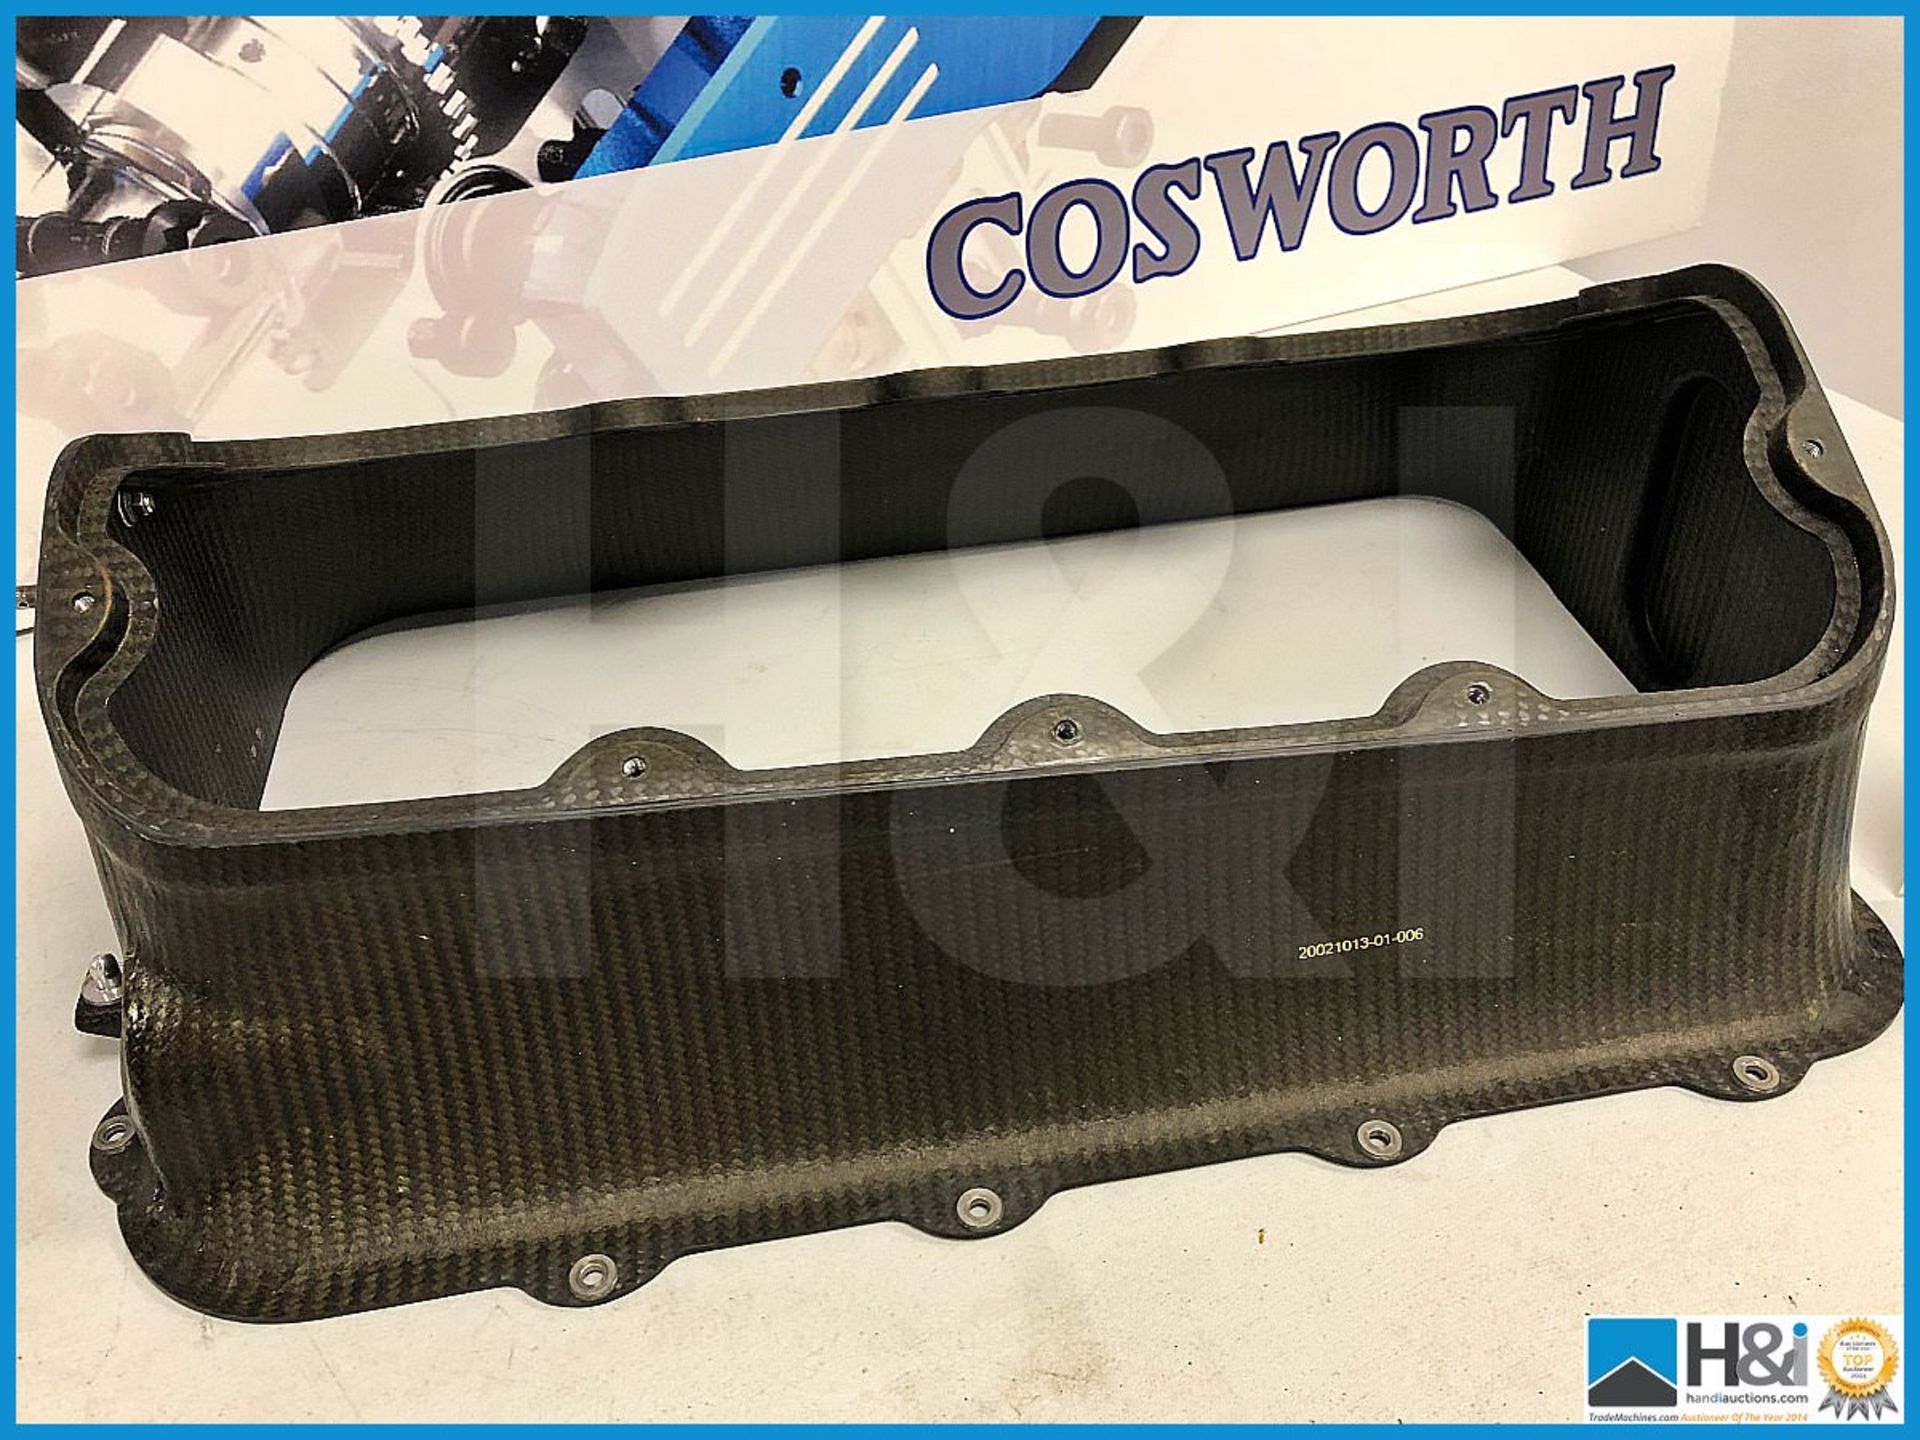 1 x Cosworth Lotus T125 GPV8 air box assembly upper. Code: 20021013 - Image 2 of 2